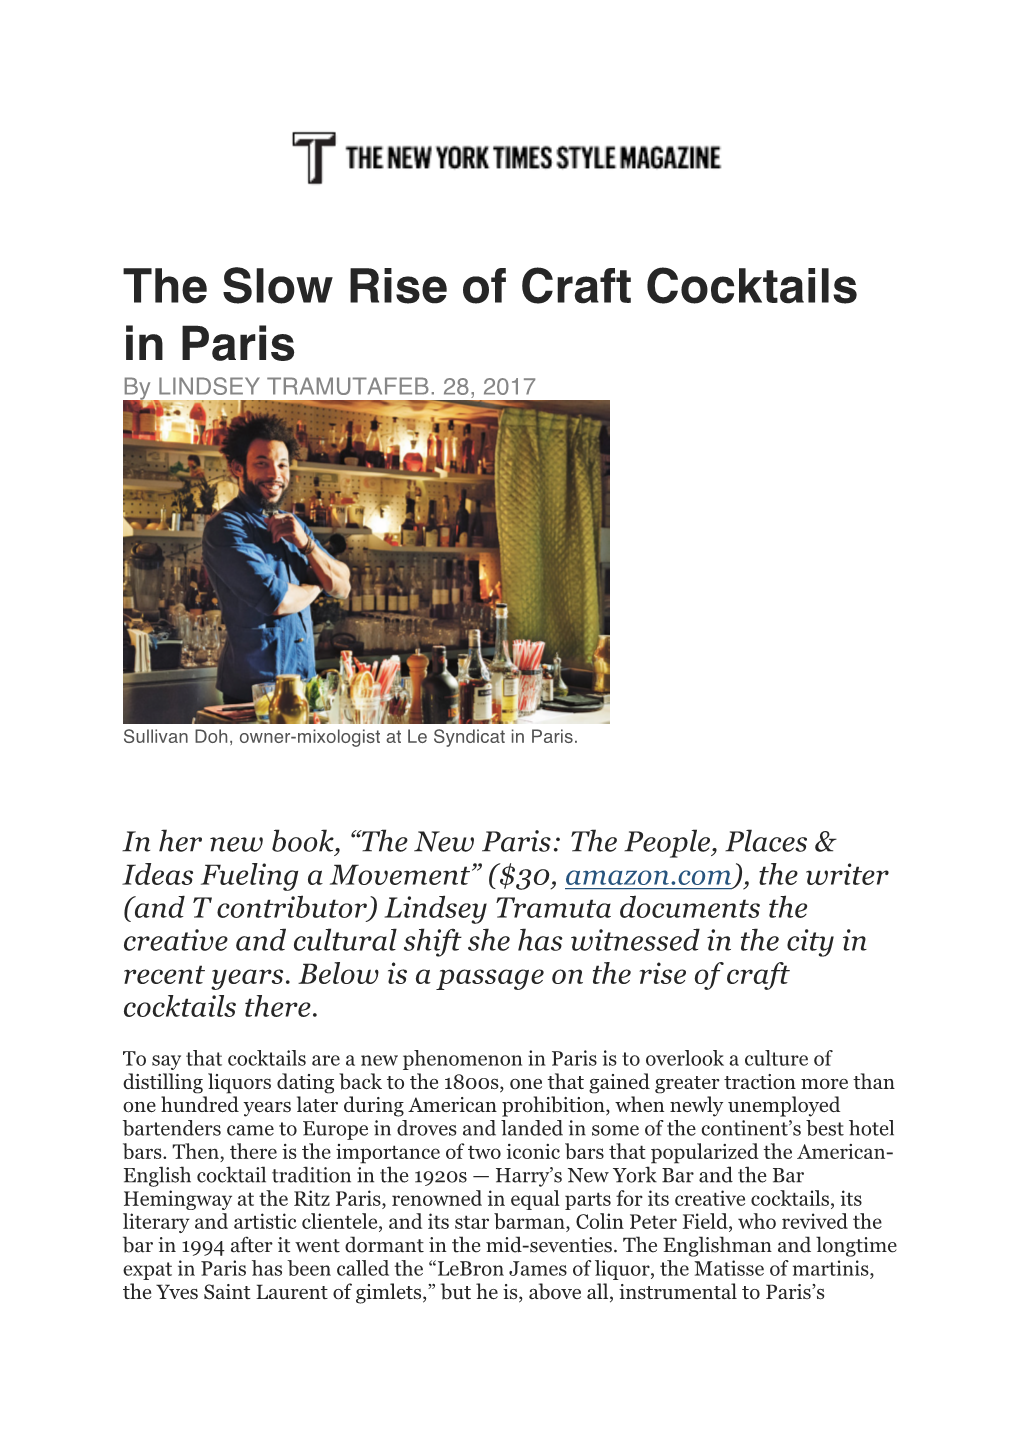 The Slow Rise of Craft Cocktails in Paris by LINDSEY TRAMUTAFEB